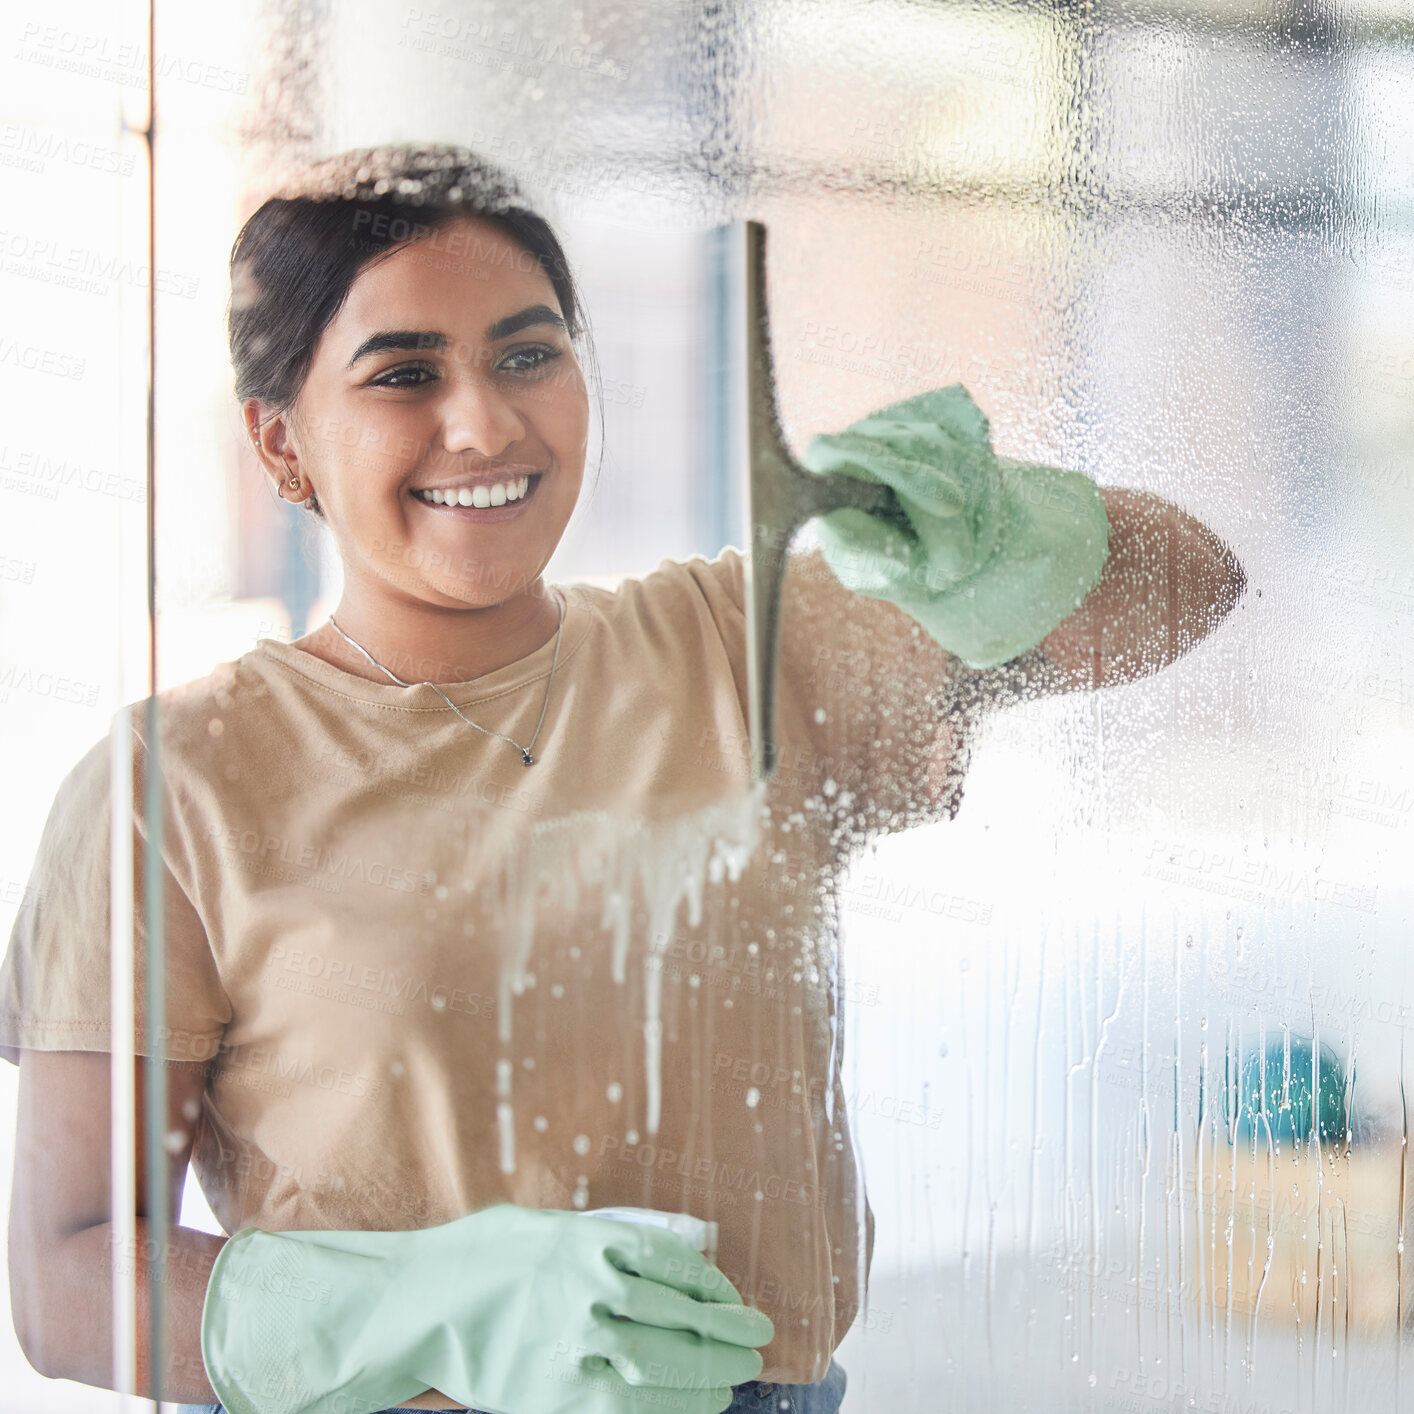 Buy stock photo Happy, smile and girl cleaning window with spray bottle and soap or detergent, housekeeper in home or hotel. Housework, smudge and woman or professional cleaner service washing off glass in apartment